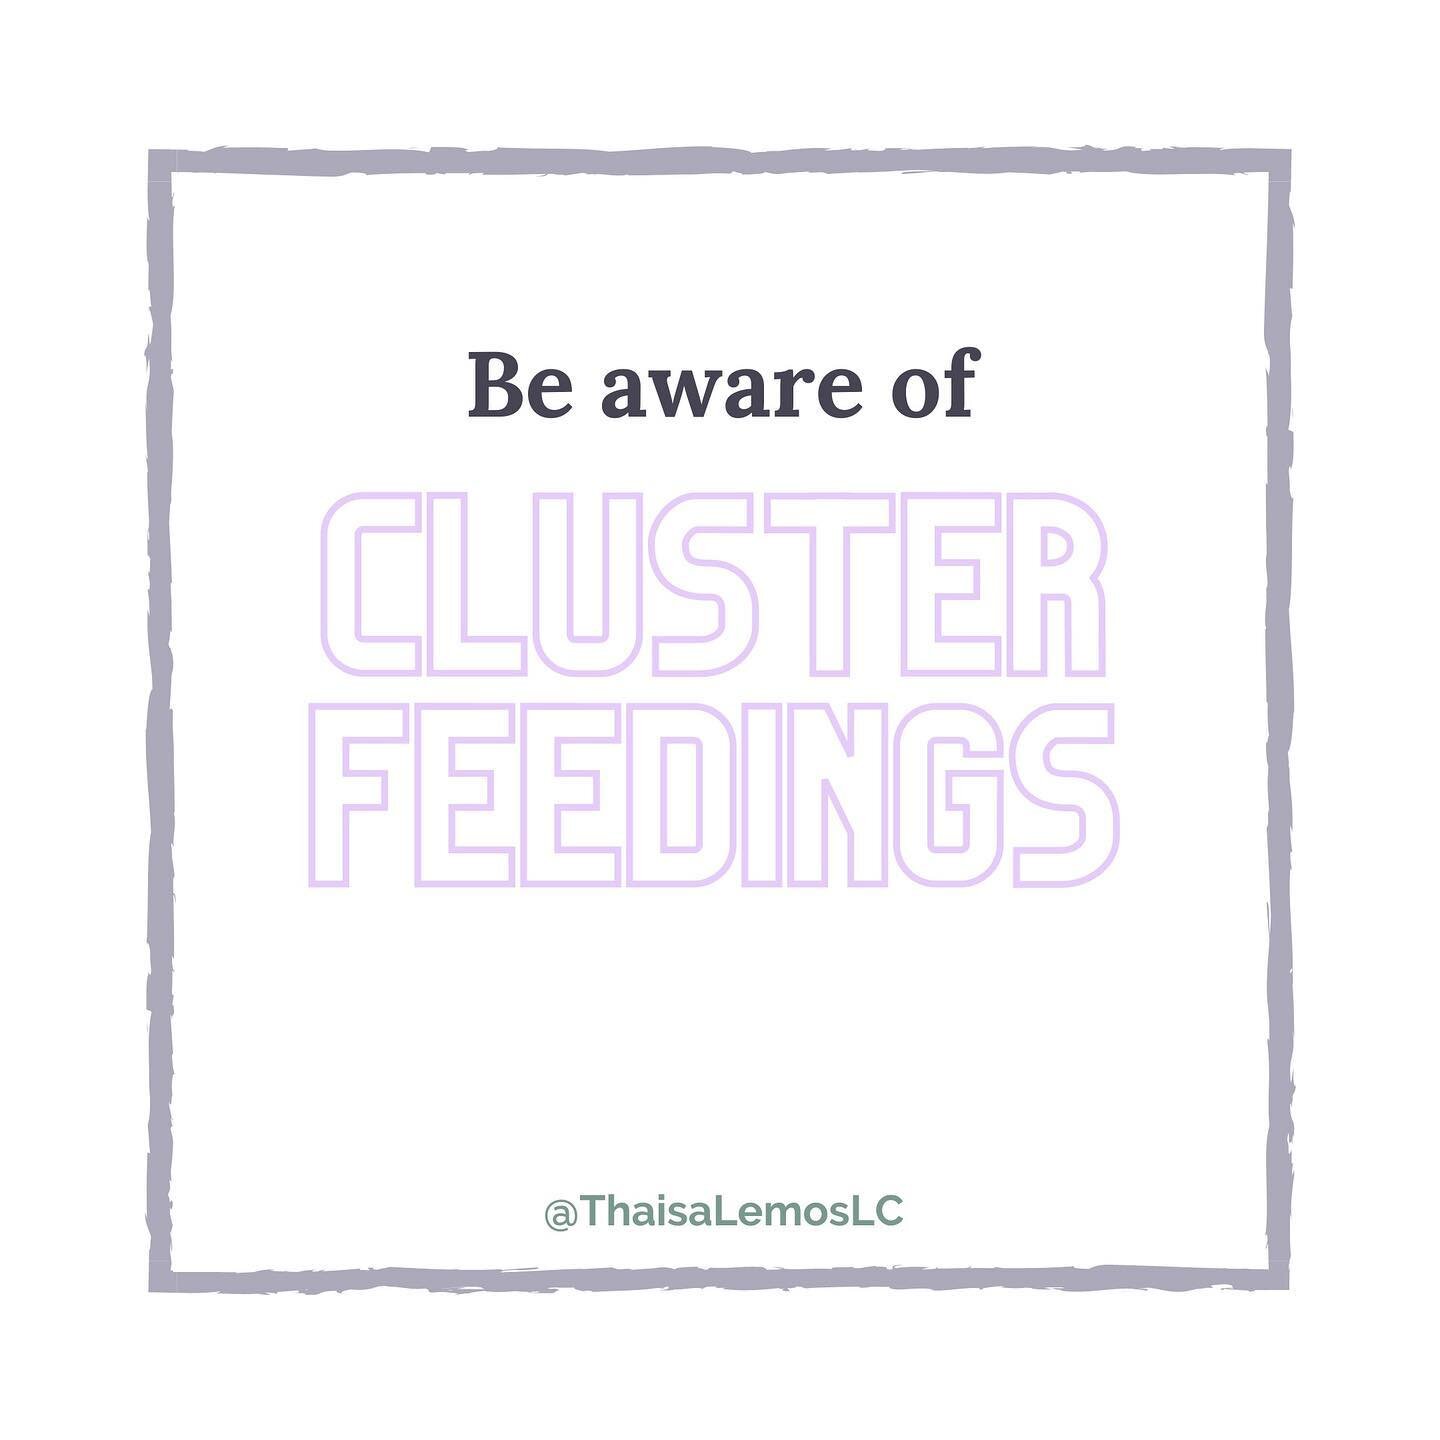 It's late afternoon, and your baby keeps wanting to nurse. What IS this? You were starting to understand the 8-12, every 2-3h routine, and now, this. 

Let me introduce you to the concept of cluster feeding, my friend. &quot;Cluster feeding&quot; usu